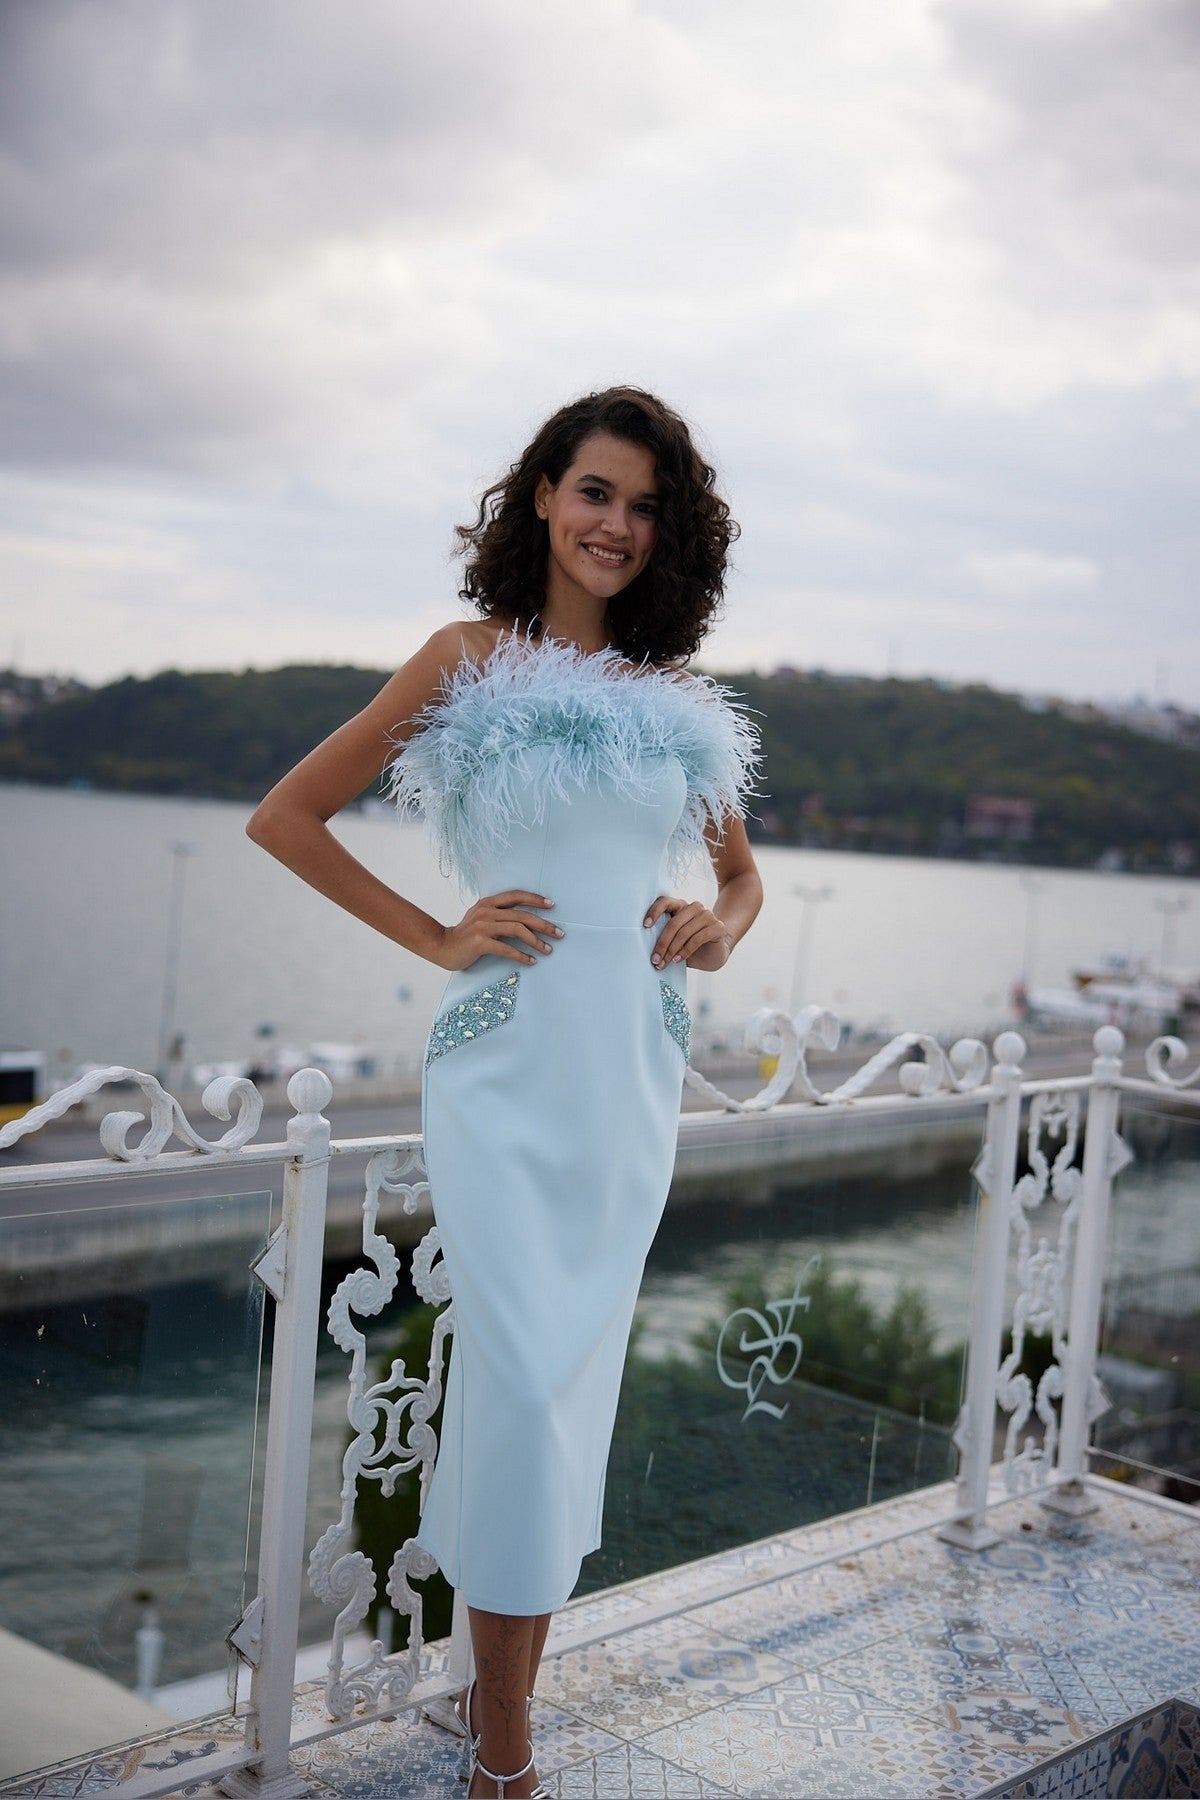 Strapless Bust Feather Detailed Dress